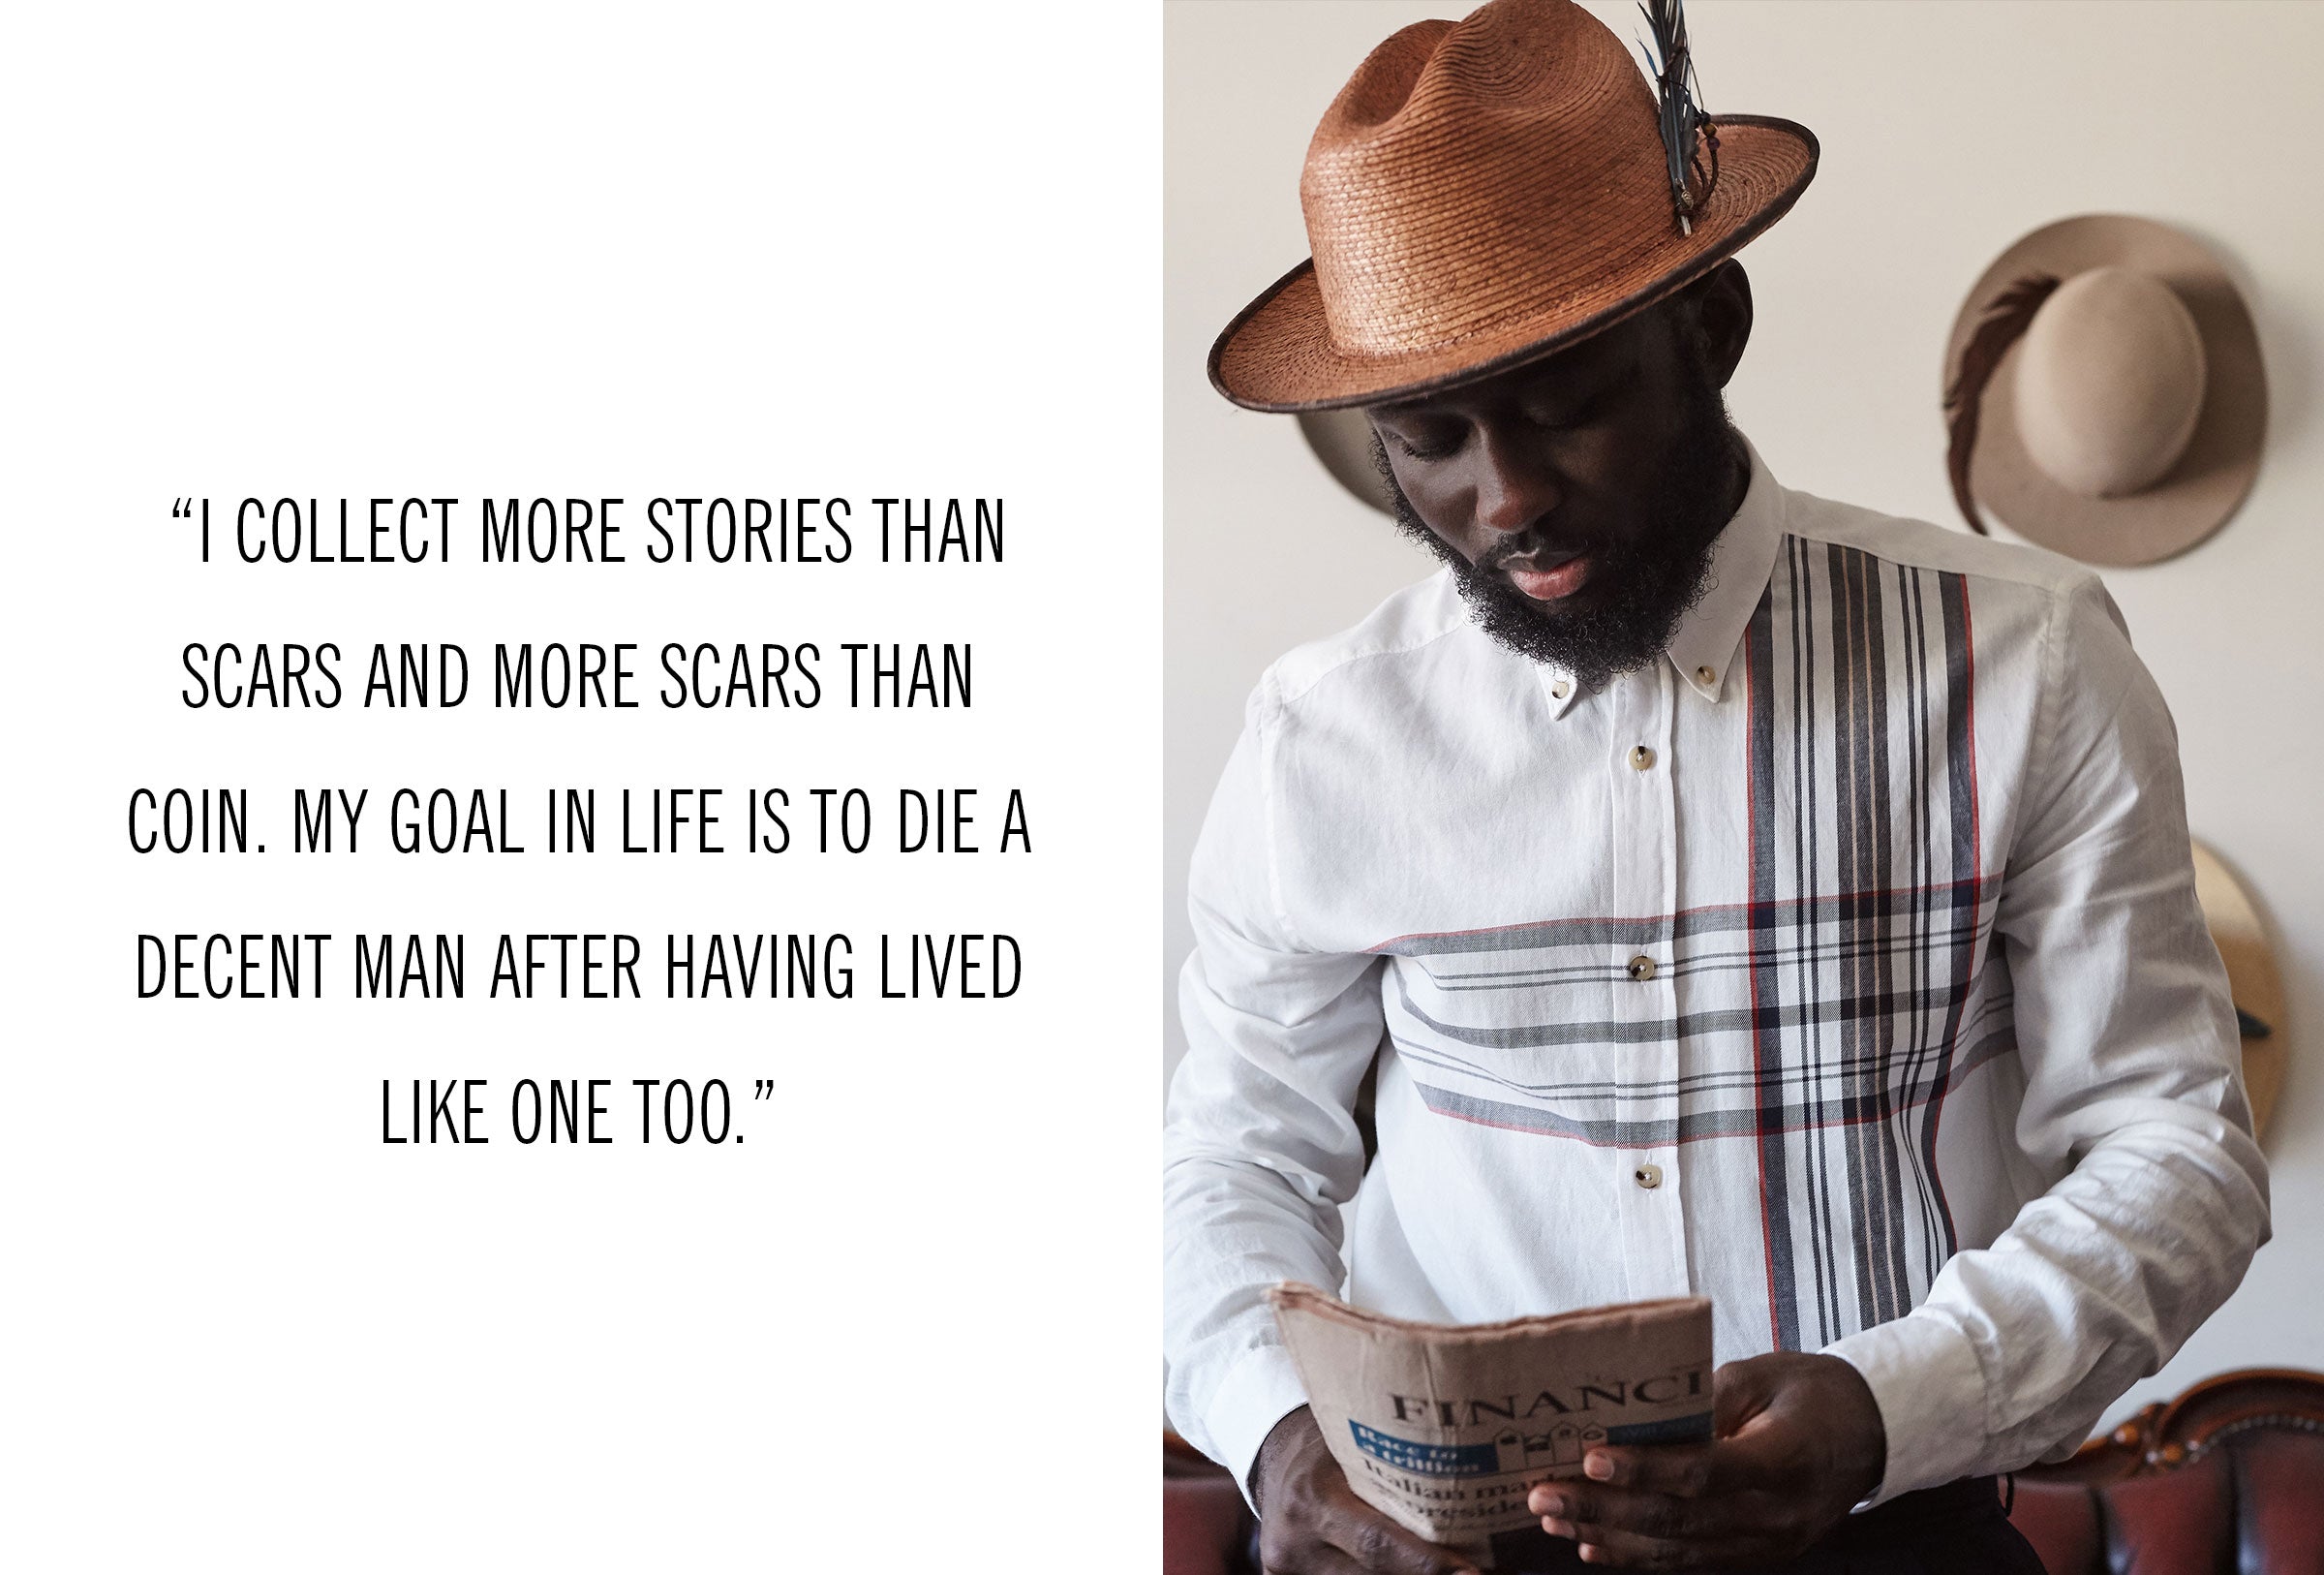 "I collect more stories than scars and more scars than coin." - Steven Onoja